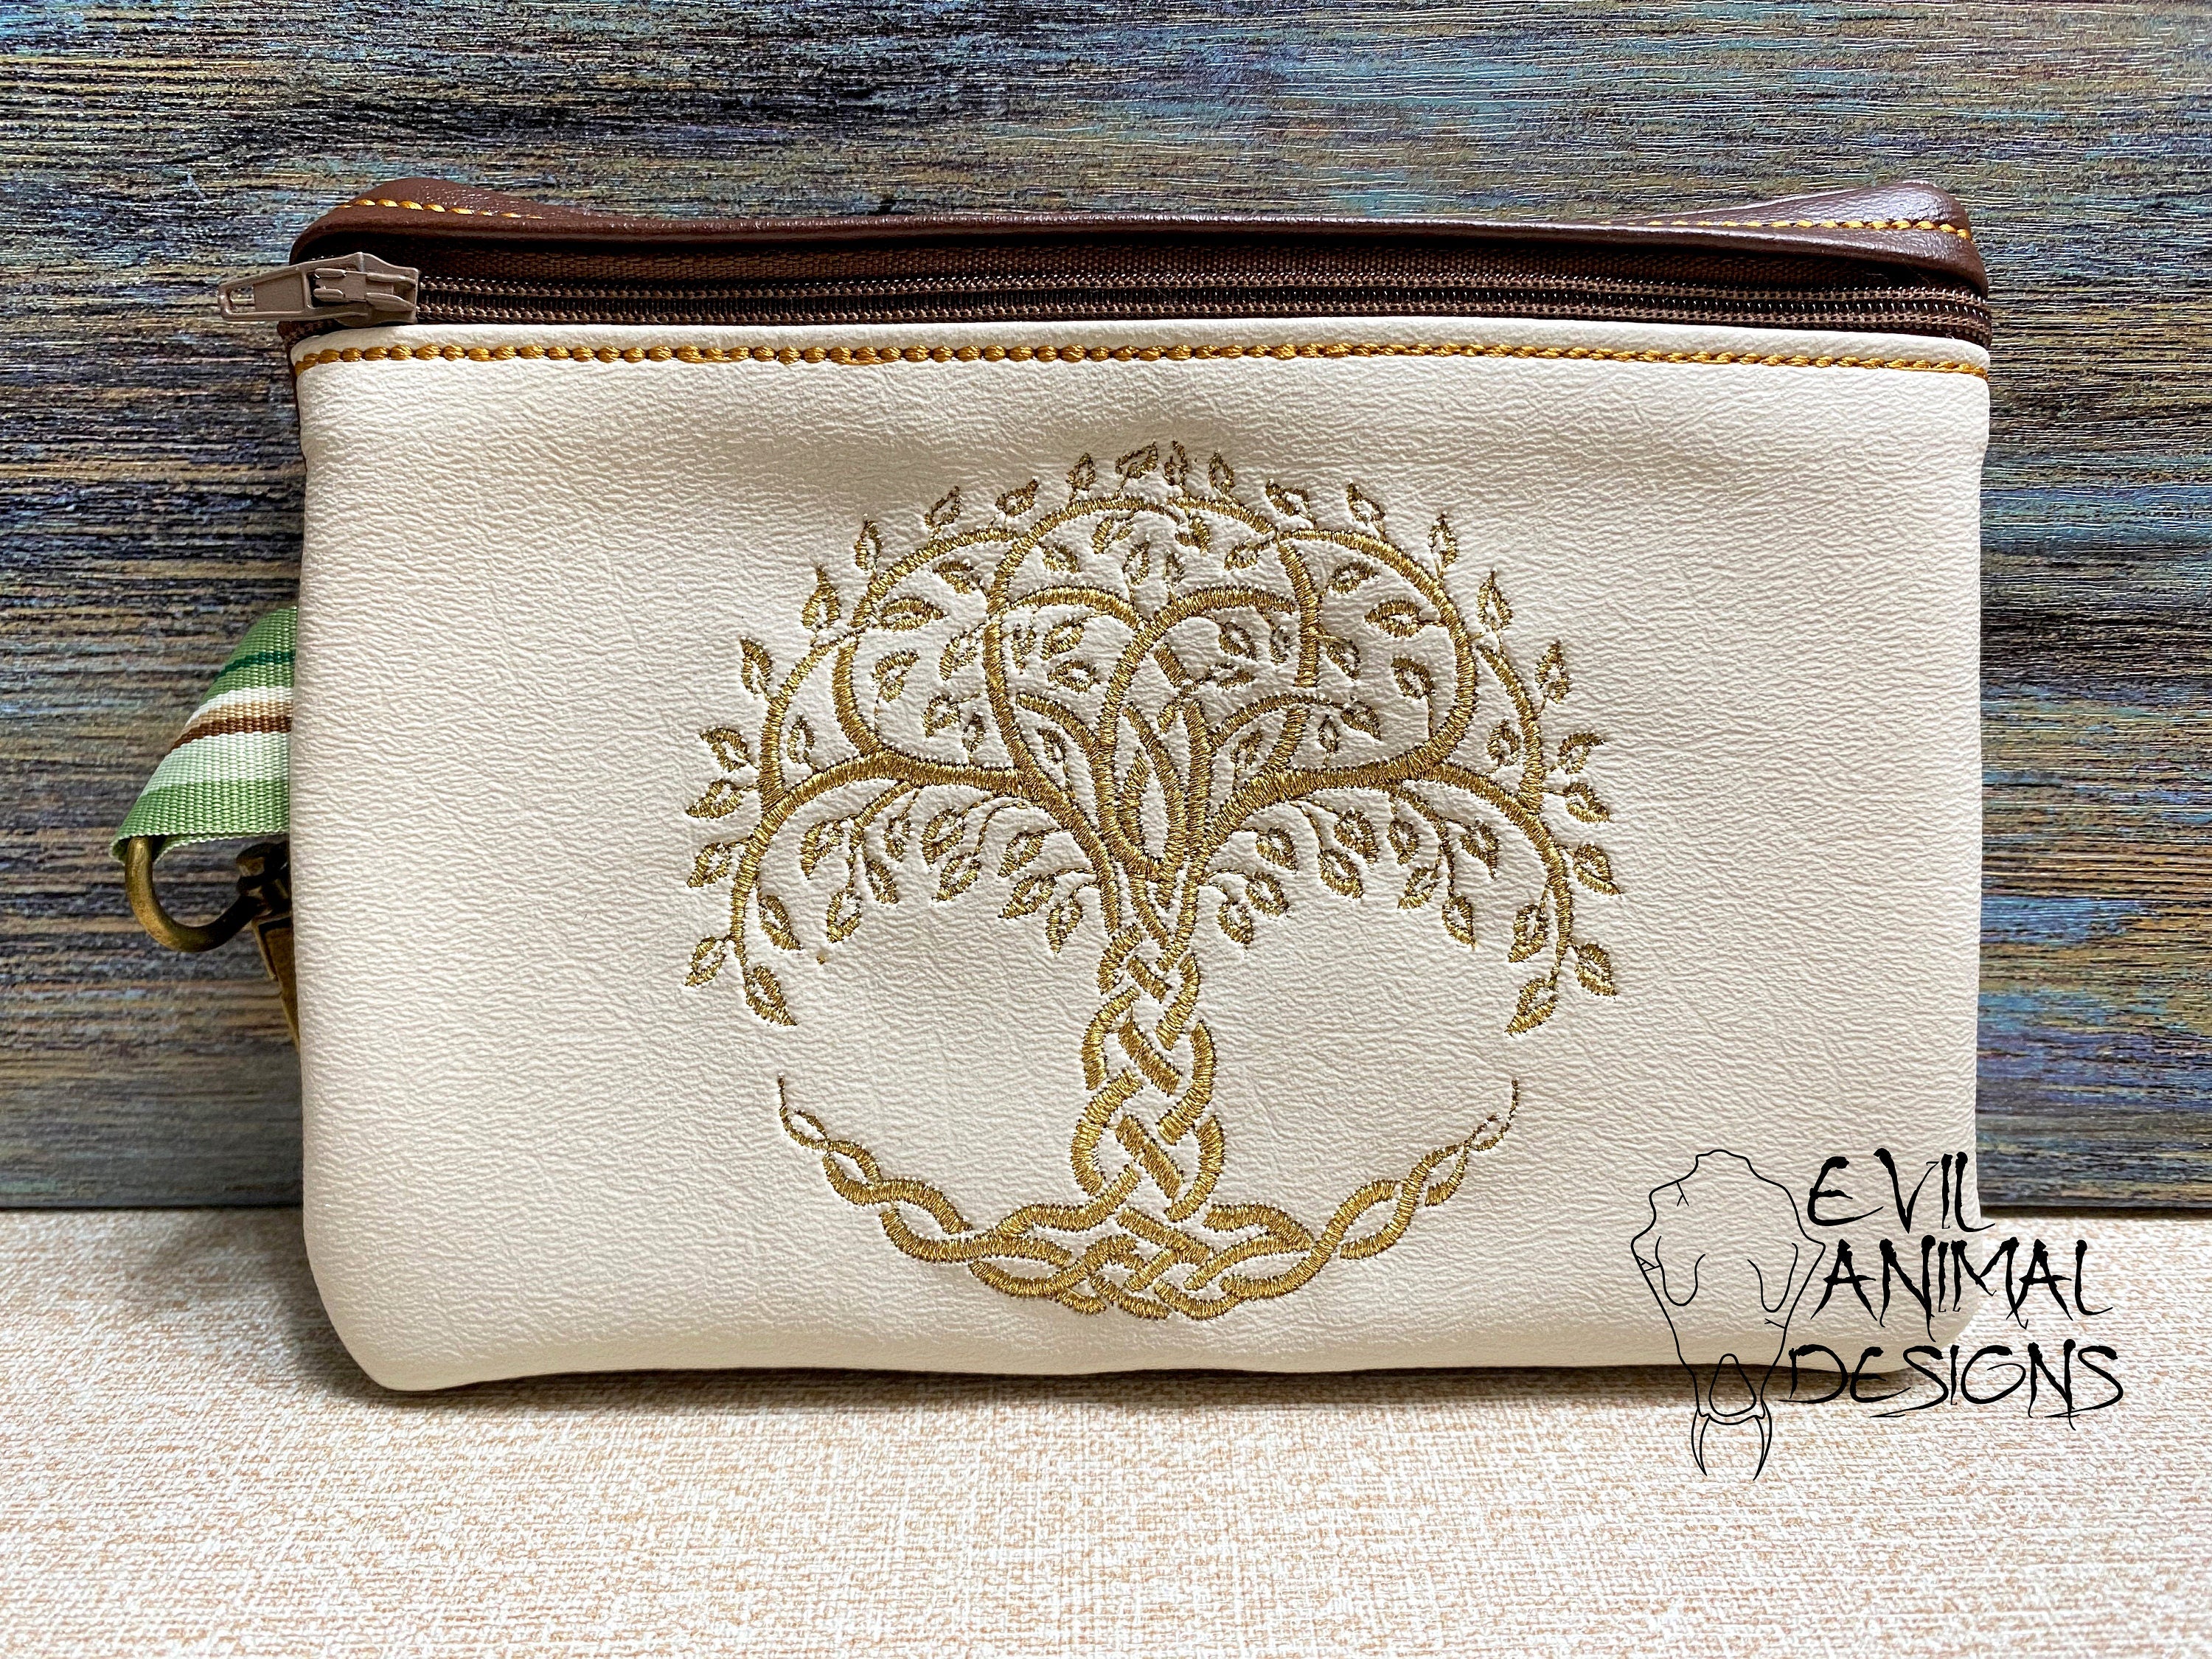 TREE OF LIFE INSPIRED CLUTCH BAG